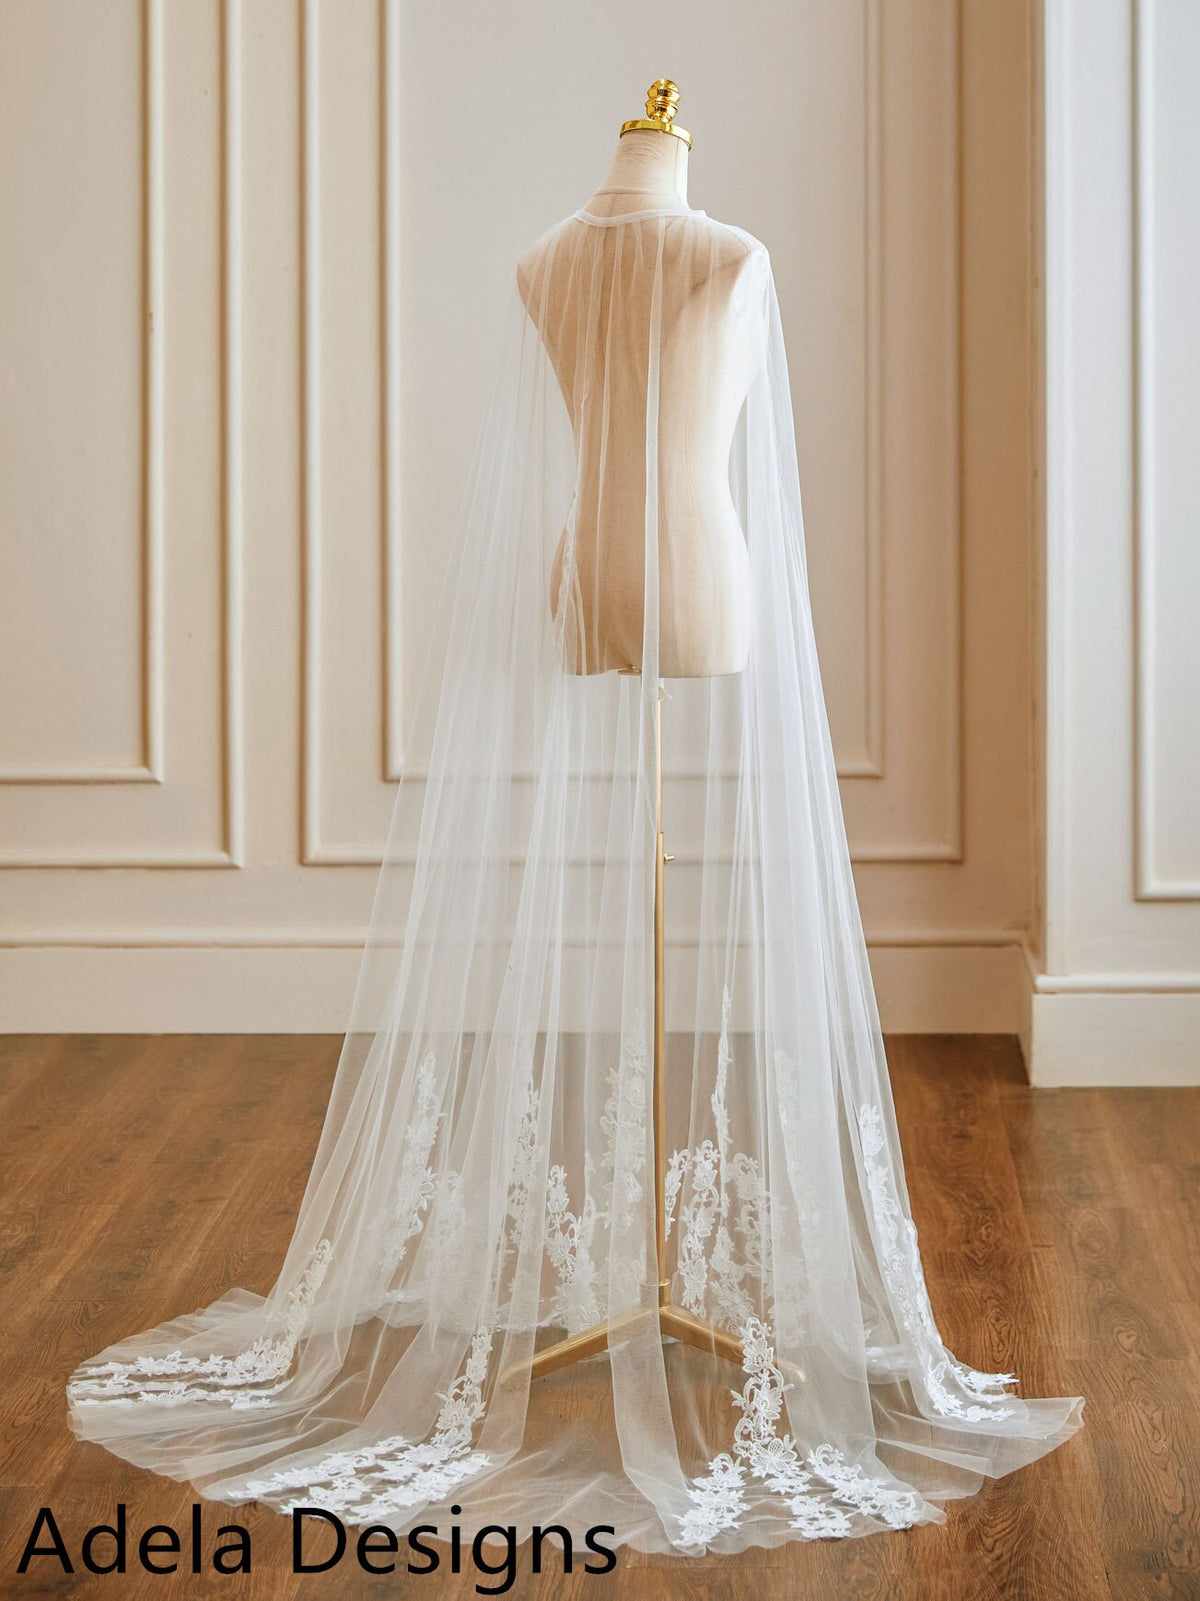 Wedding Cape Veil Delicate Lace Long Bridal Shoulder Veil In Ivory or White Lace Bottom and Edge Cape Veil